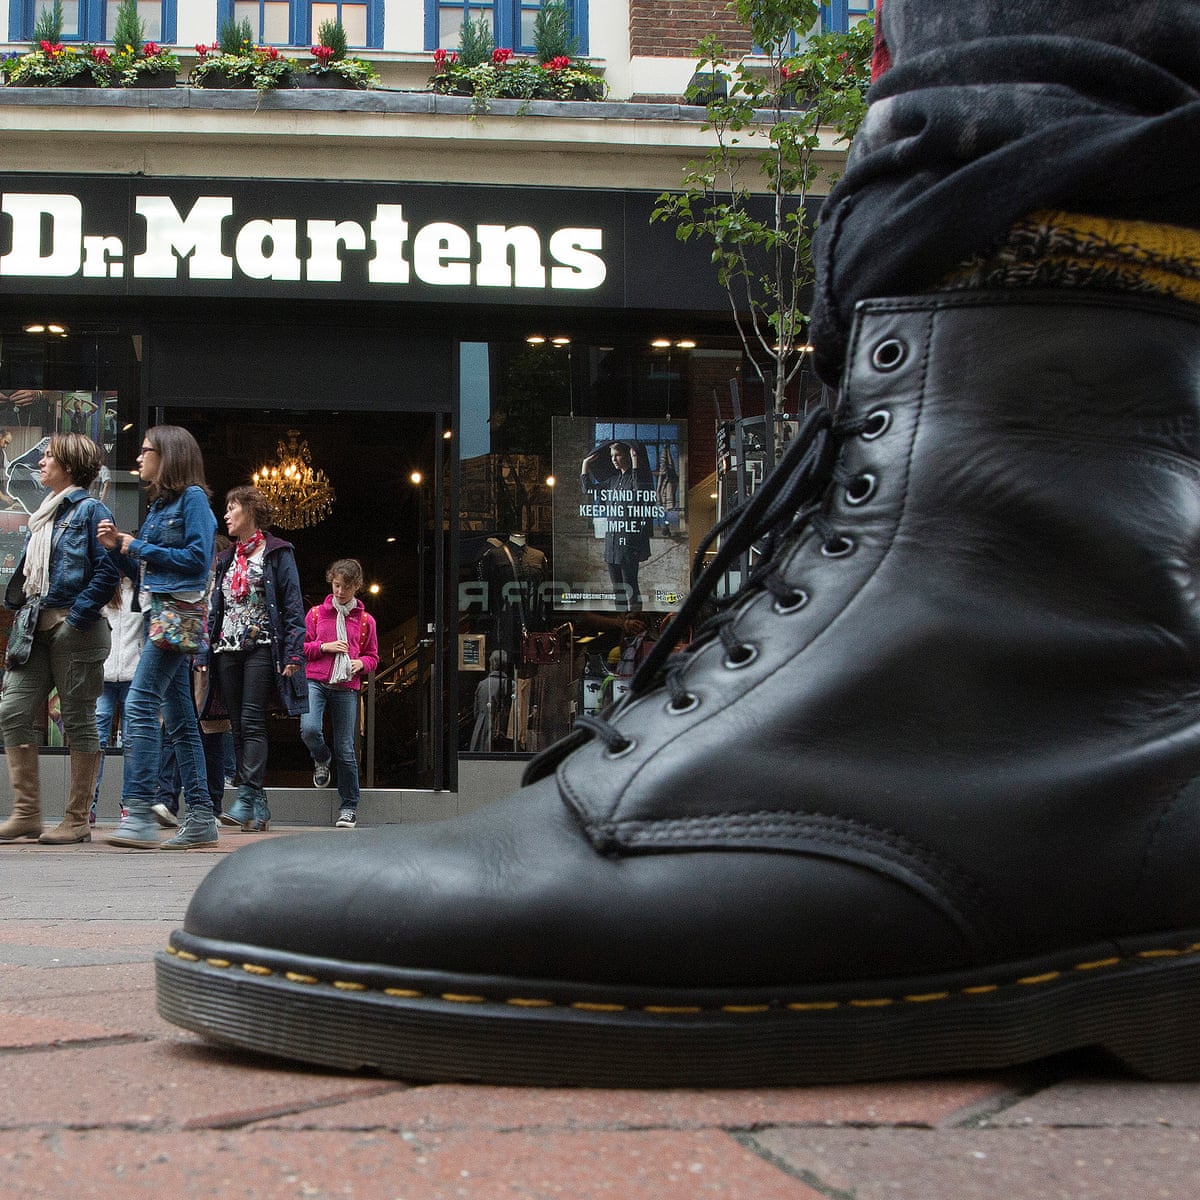 ignorance handicap Median Dr Martens: are things going wrong with the UK's beloved brand? | Consumer  affairs | The Guardian